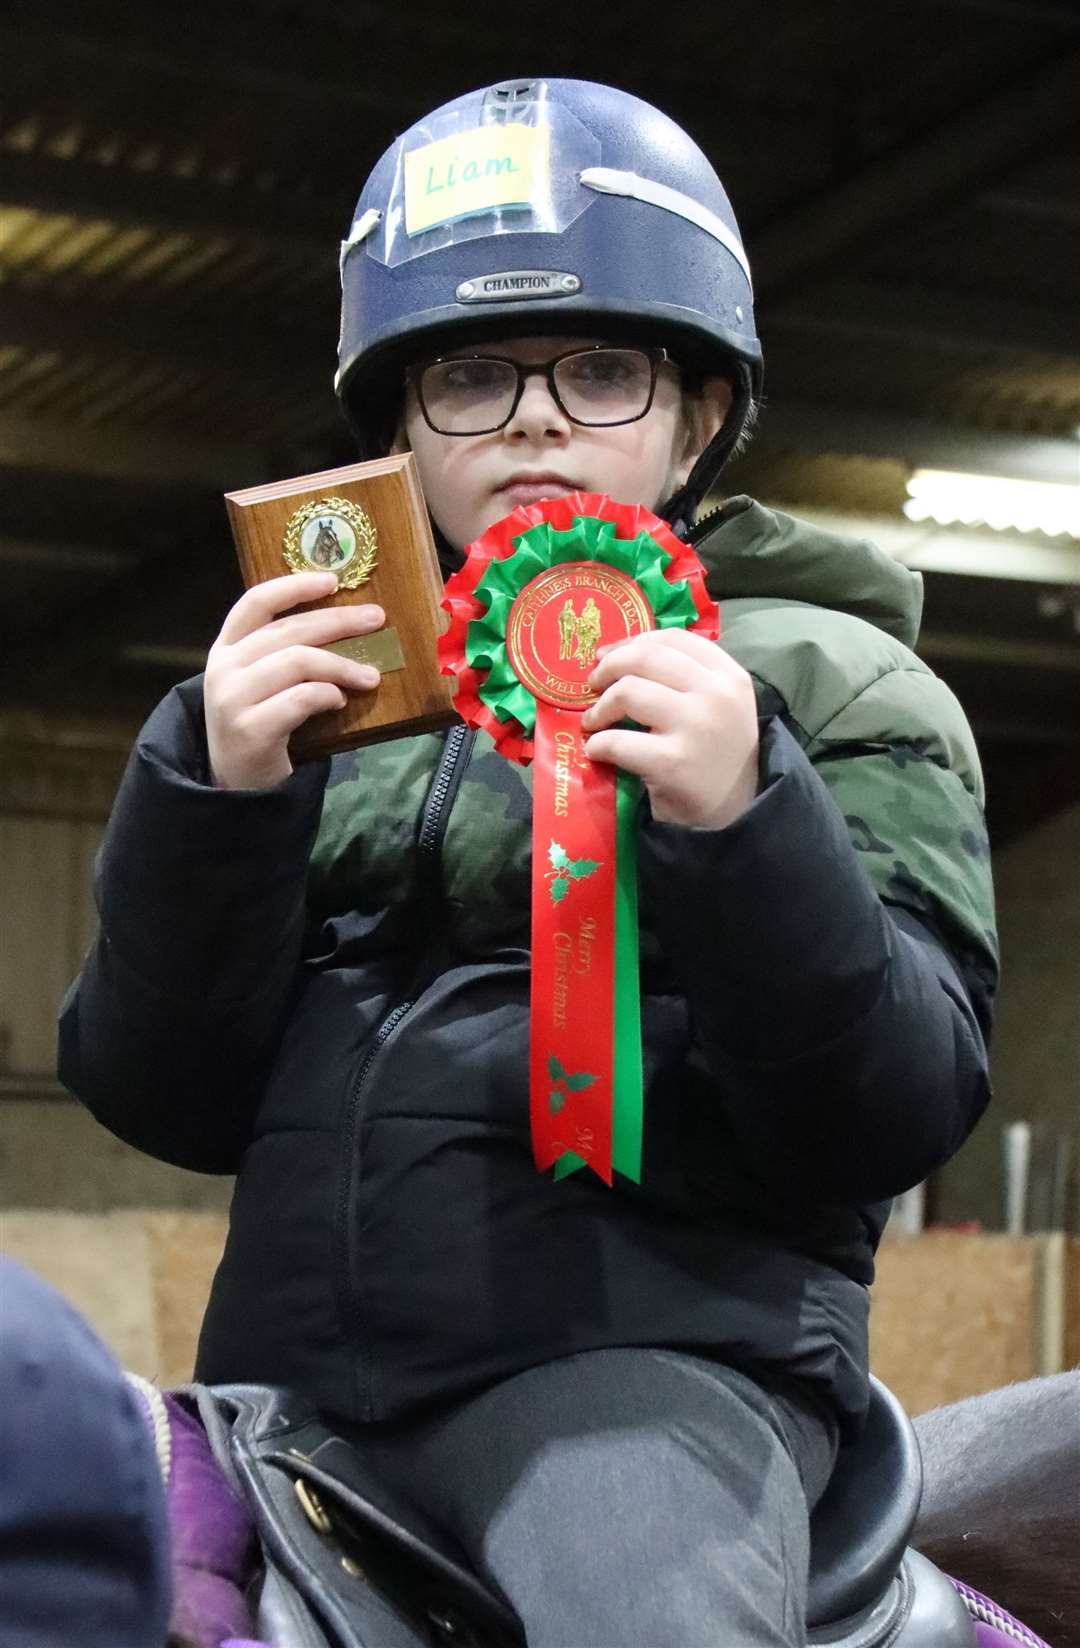 Liam Brown from Ride 1 with his shield for achievement and rosette. Picture: Neil Buchan